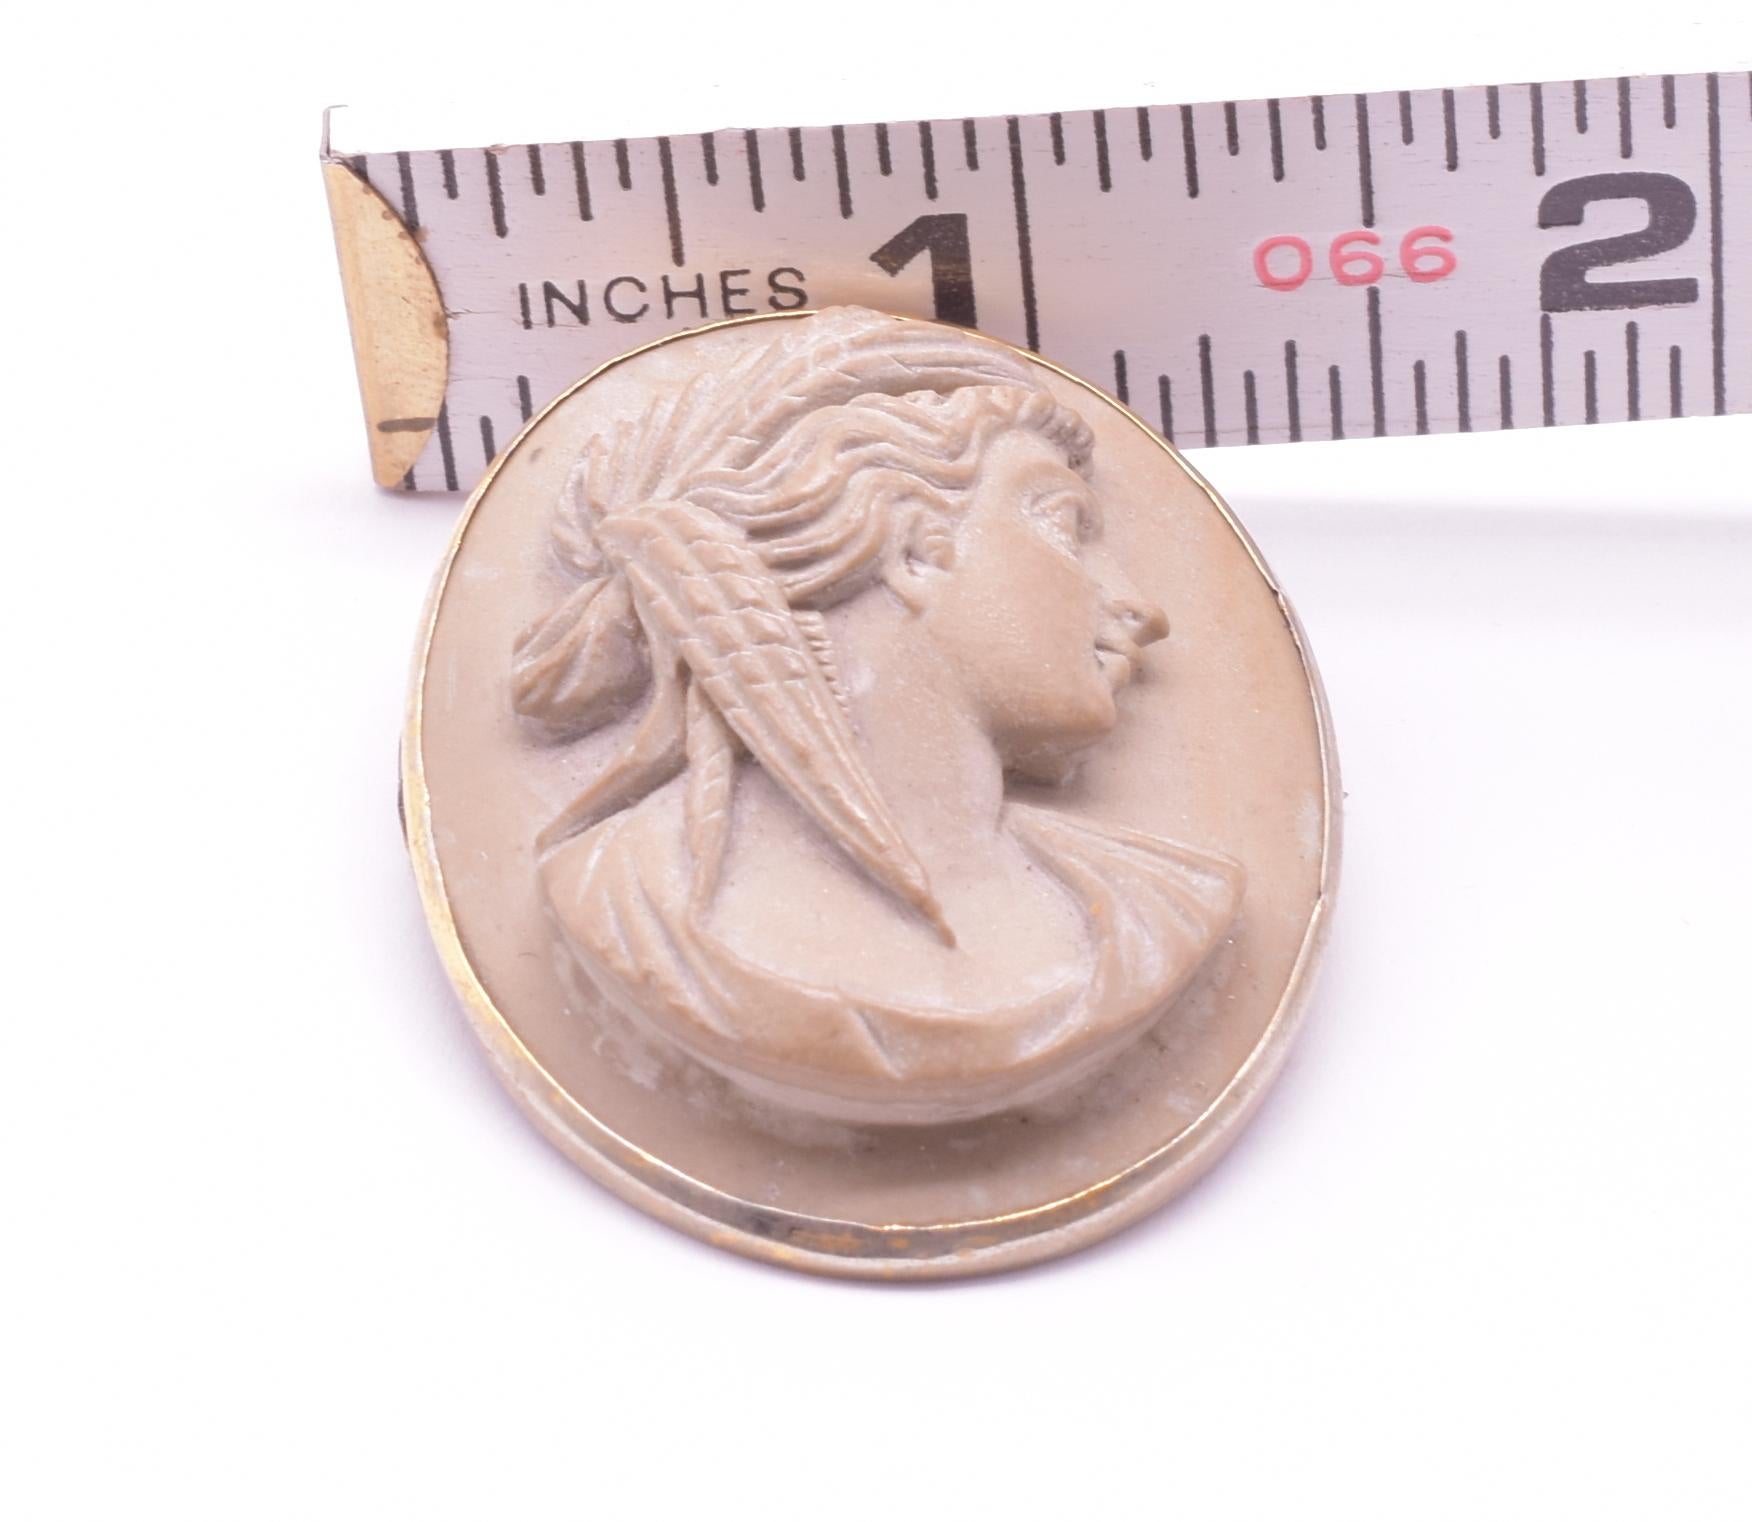 C1850 Lava Putty Cameo Brooch of Demeter, Goddess of Agriculture For Sale 2